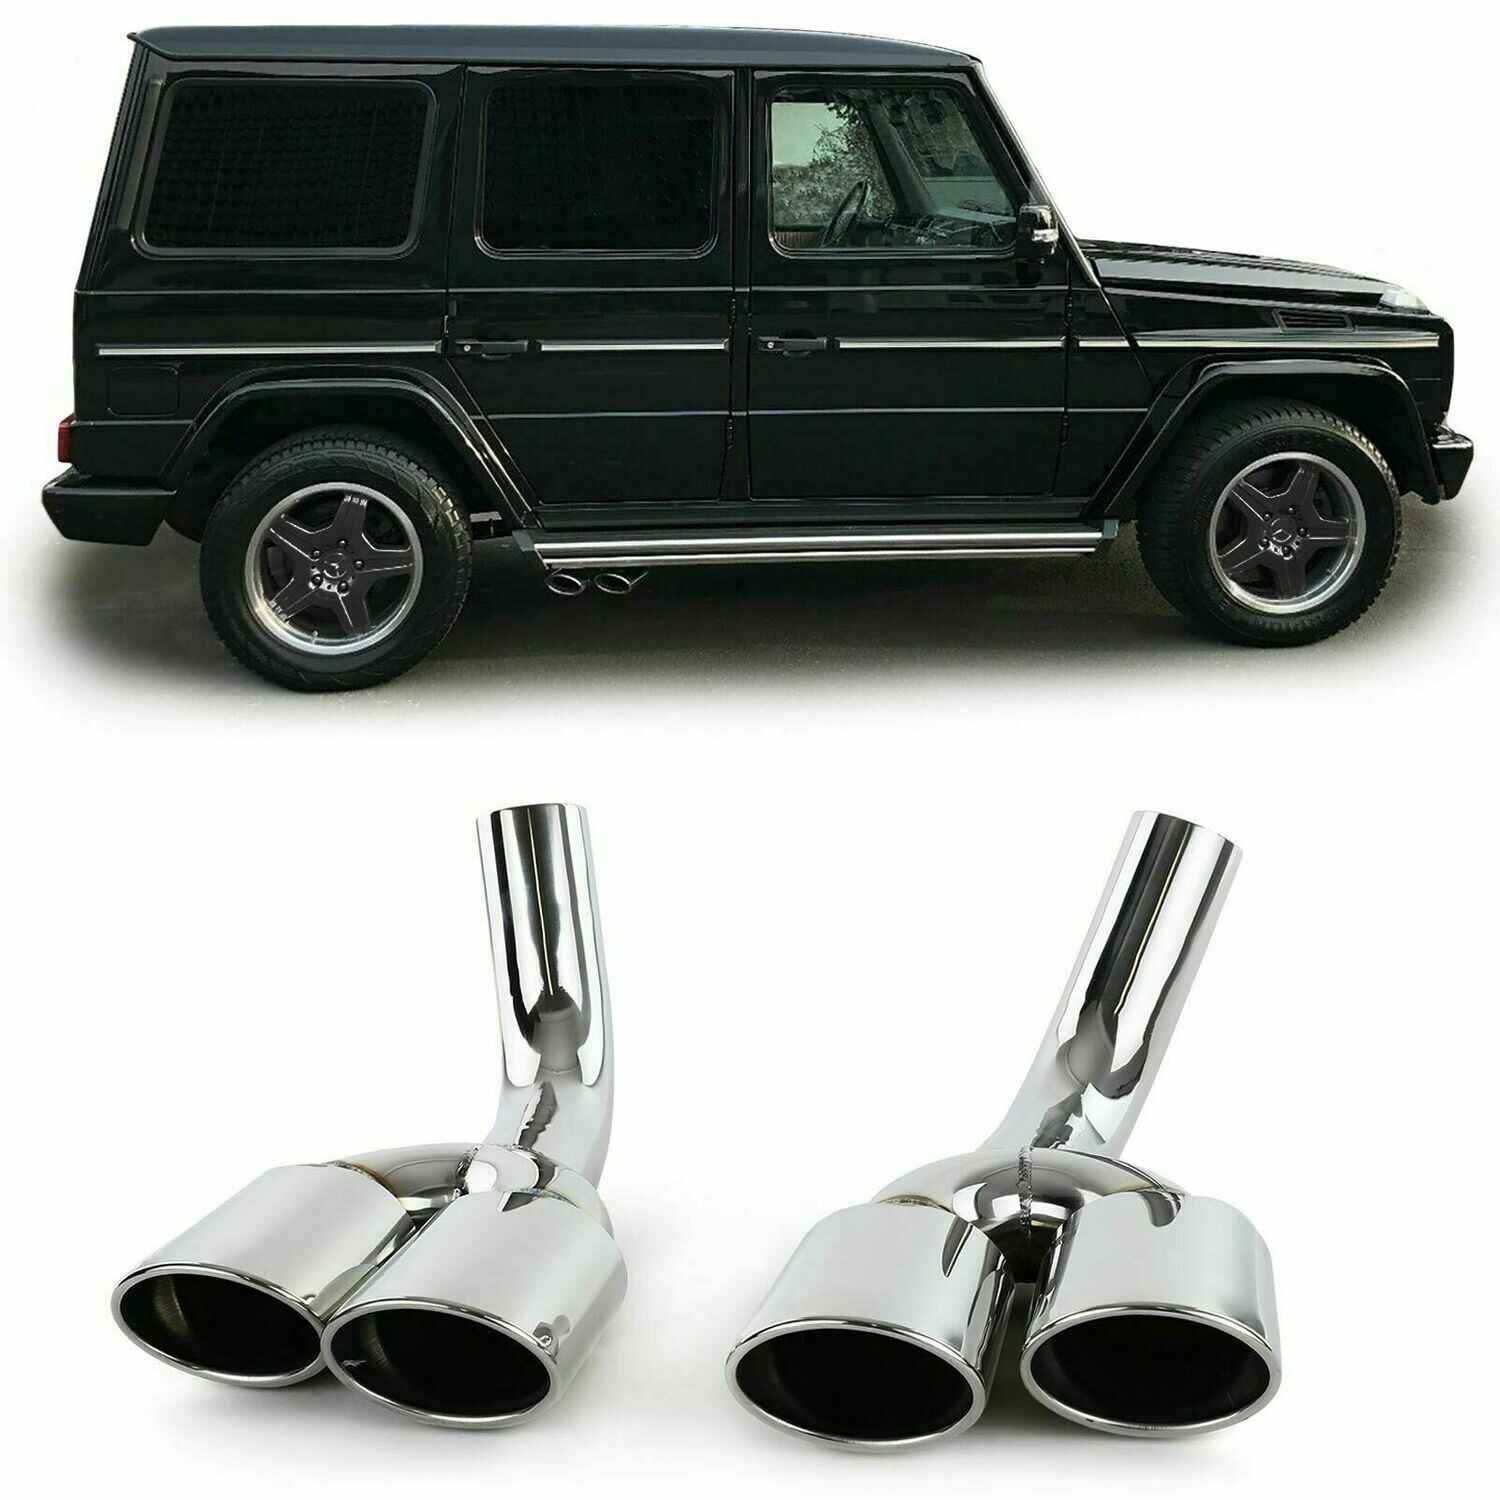 Rear Exhaust Pipes for MERCEDES W463 G500 G55 G-CLASS 98-15